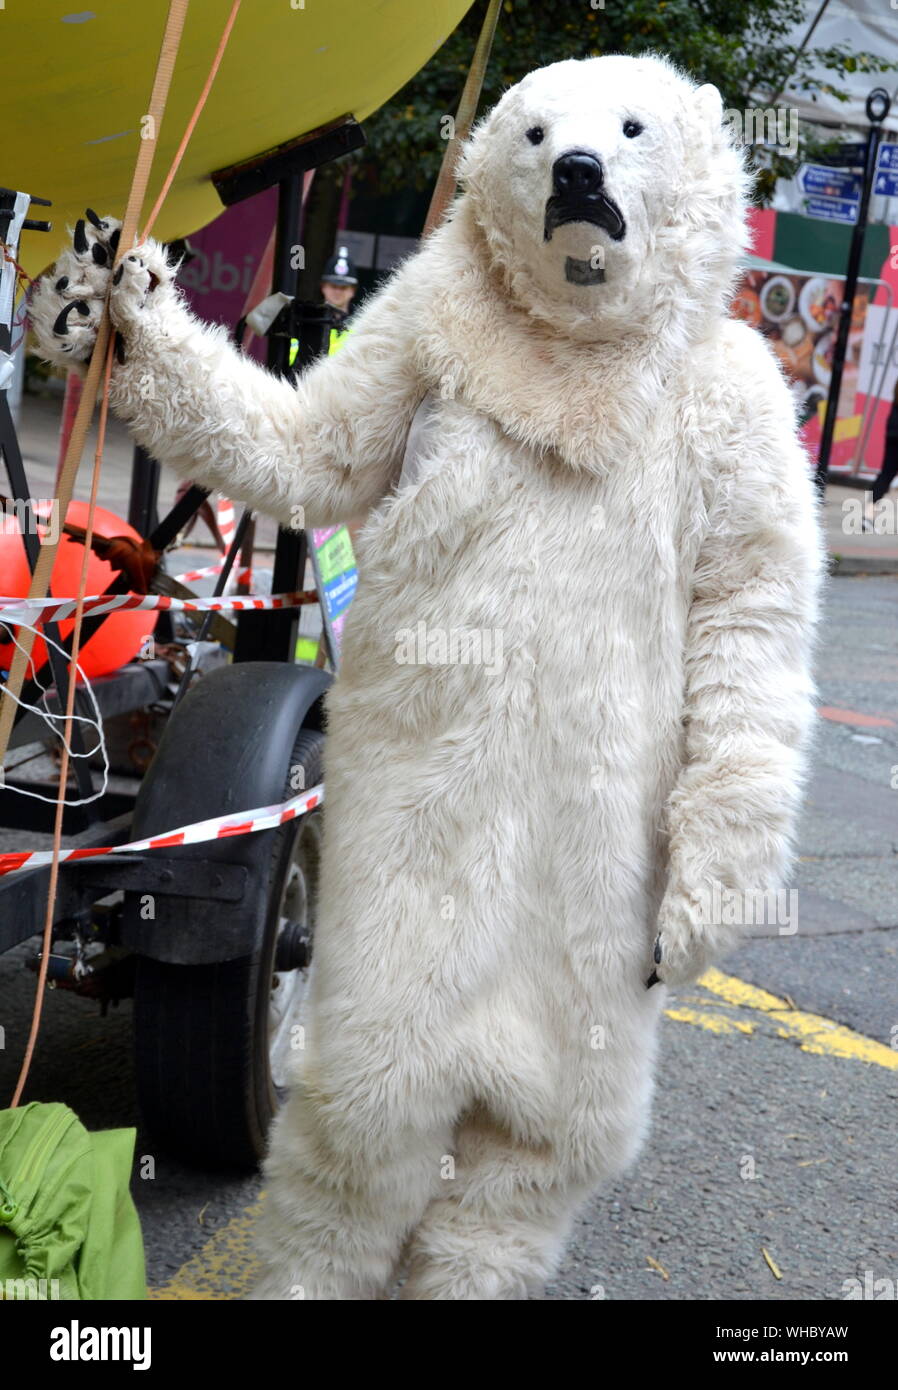 A person in a polar bear suit on Deansgate as Northern Rebellion protesters, part of the global movement Extinction Rebellion, marched through Manchester, uk, and held a series of die-ins to urge for action on climate change on September 2nd, 2019. Protest sites included Barclays Bank, a Primark store and HSBC Bank. This was the fourth day of a protest which blocked Deansgate, a main road in central Manchester. Stock Photo